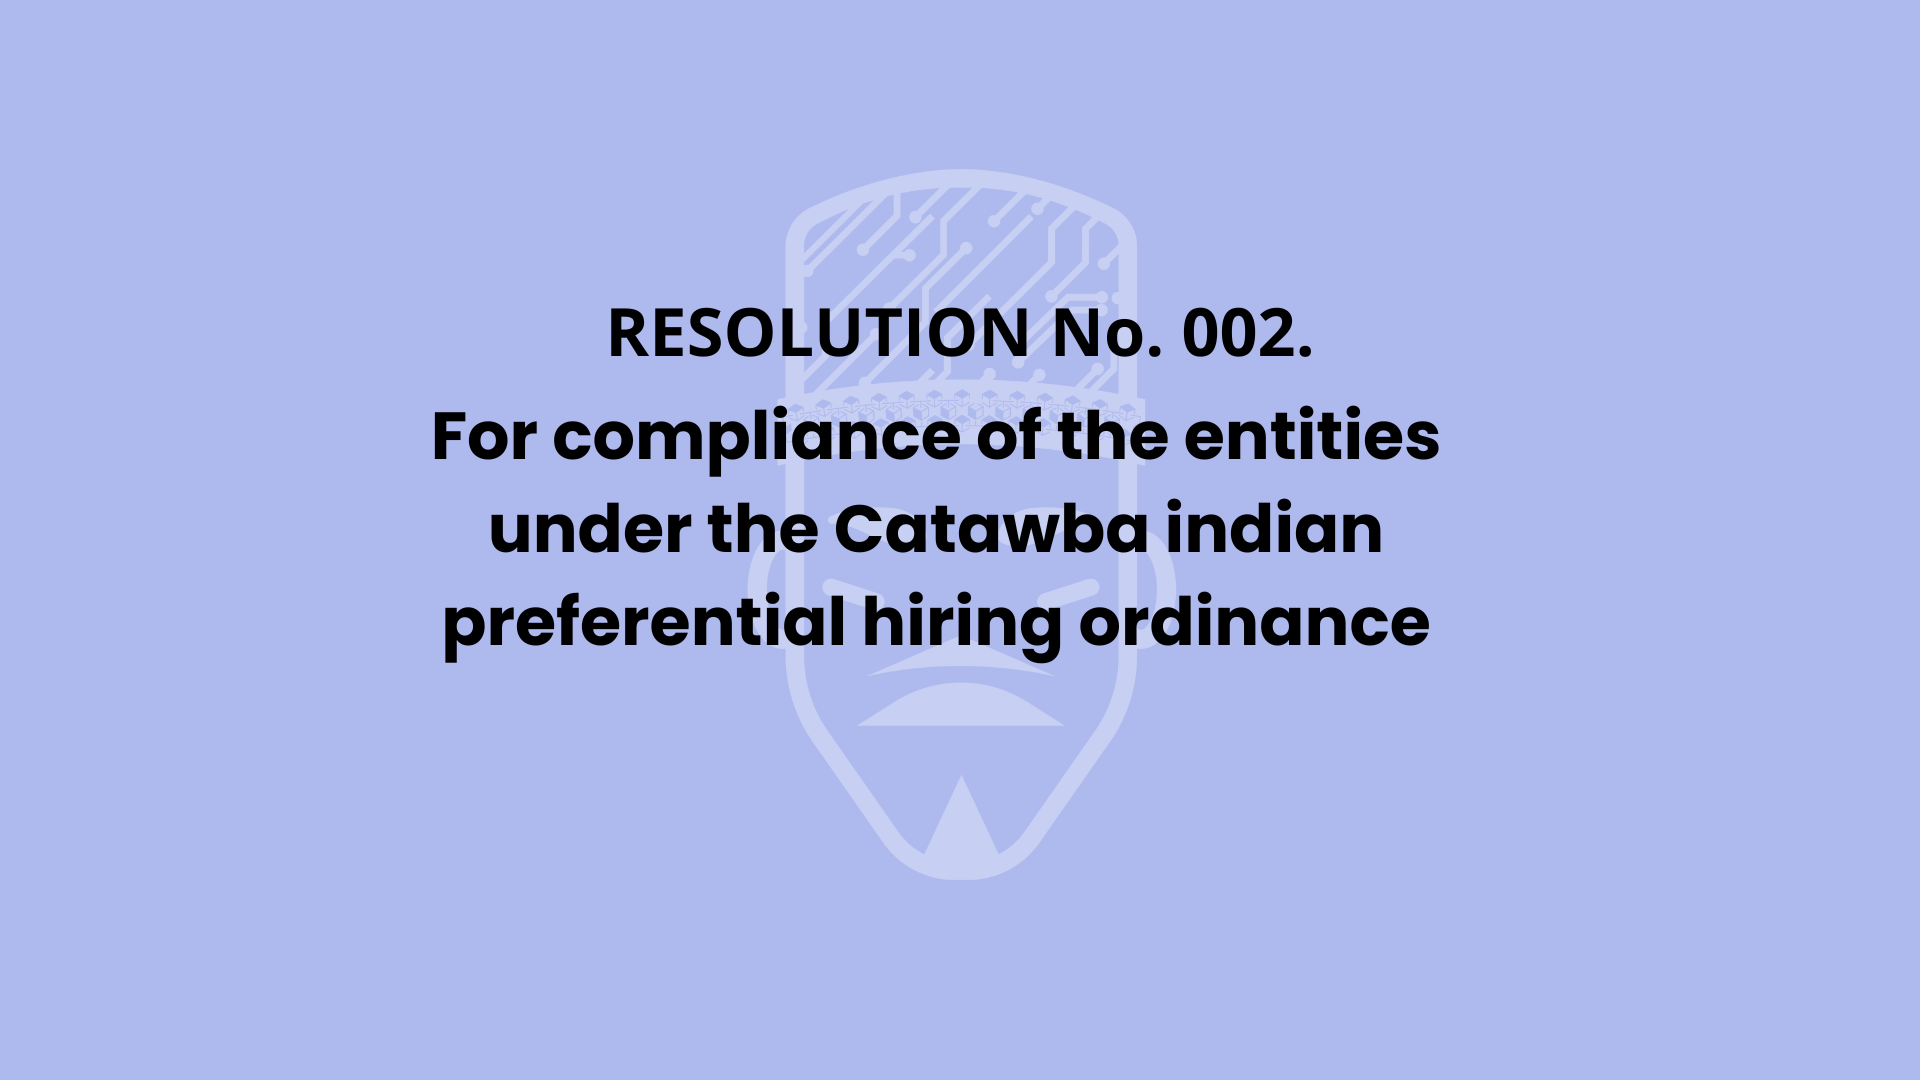 FOR_COMPLICANE_OF_THE_ENTTITES_UNDER_THE_CATAWBA_INDIAN_PREFERENTIAL_HIRING_ORDINANCE